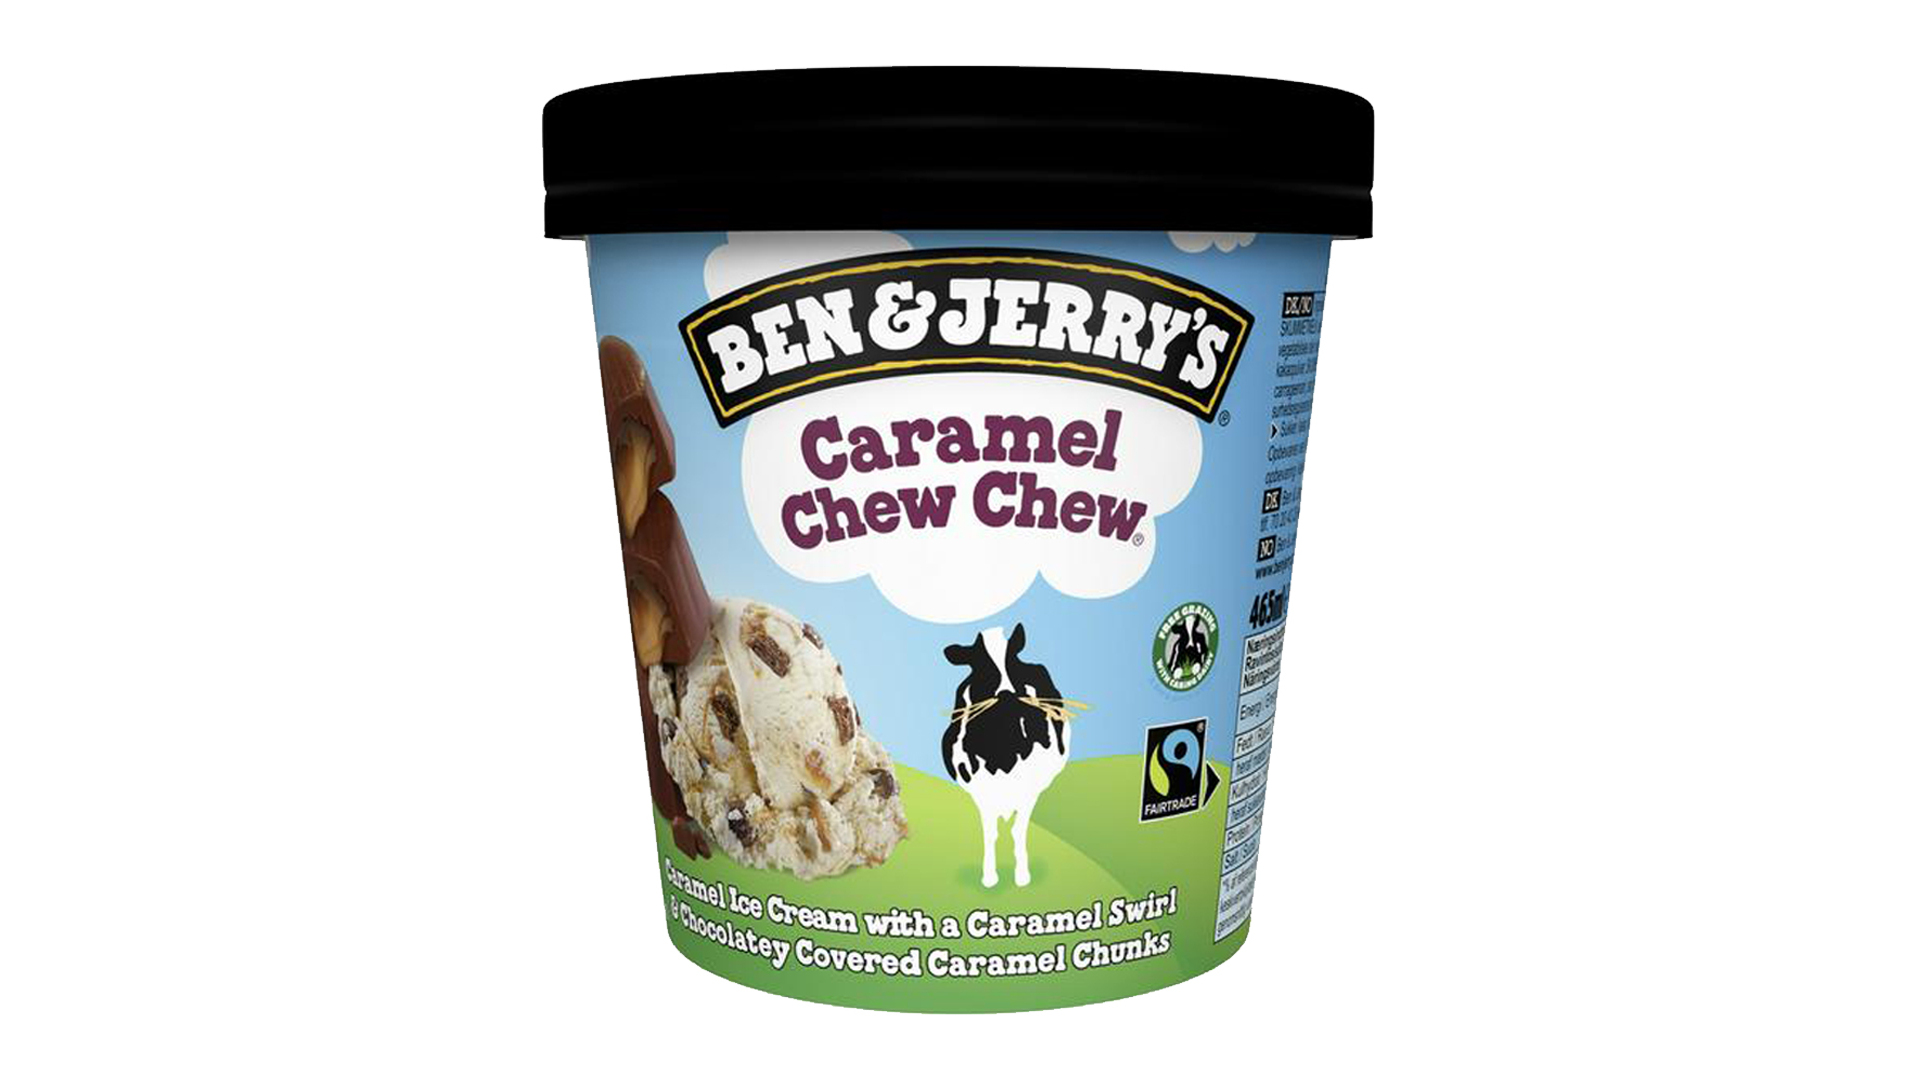 Ben & Jerry's Caramel Chew Chew 500ml - Fried Chicken Delivery in Repton Park IG8